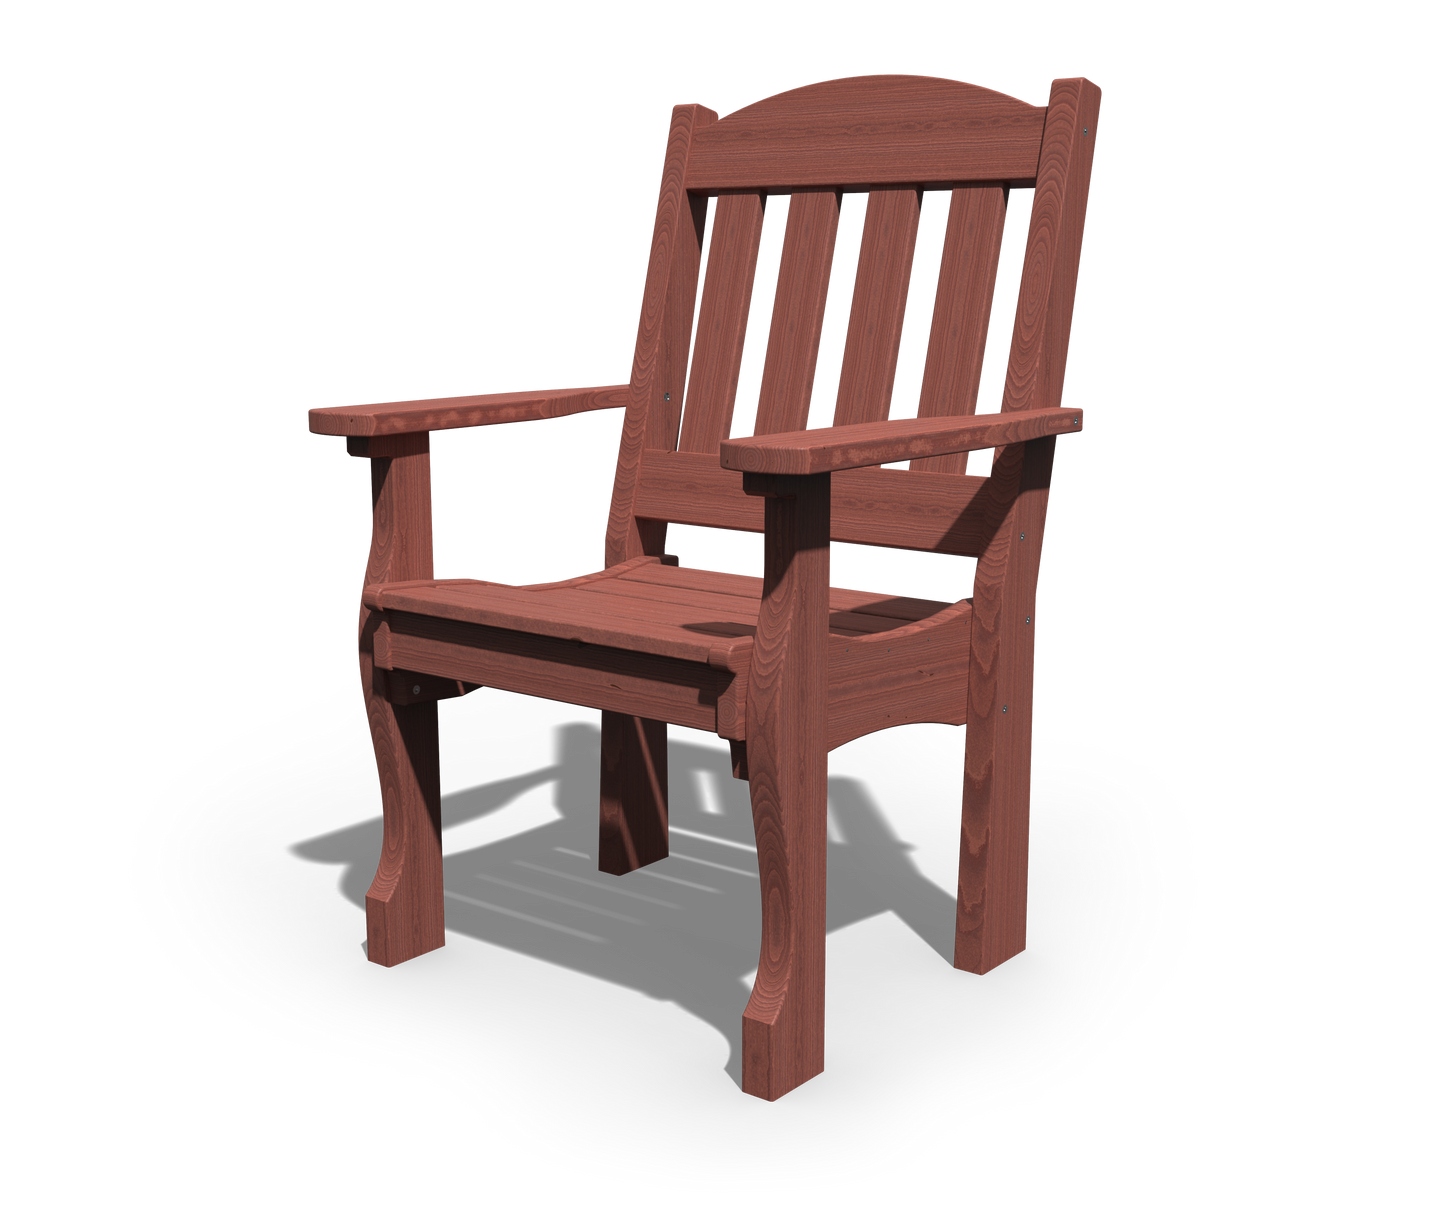 Patiova Pressure Treated Pine English Garden Arm Chair - LEAD TIME TO SHIP 3 WEEKS